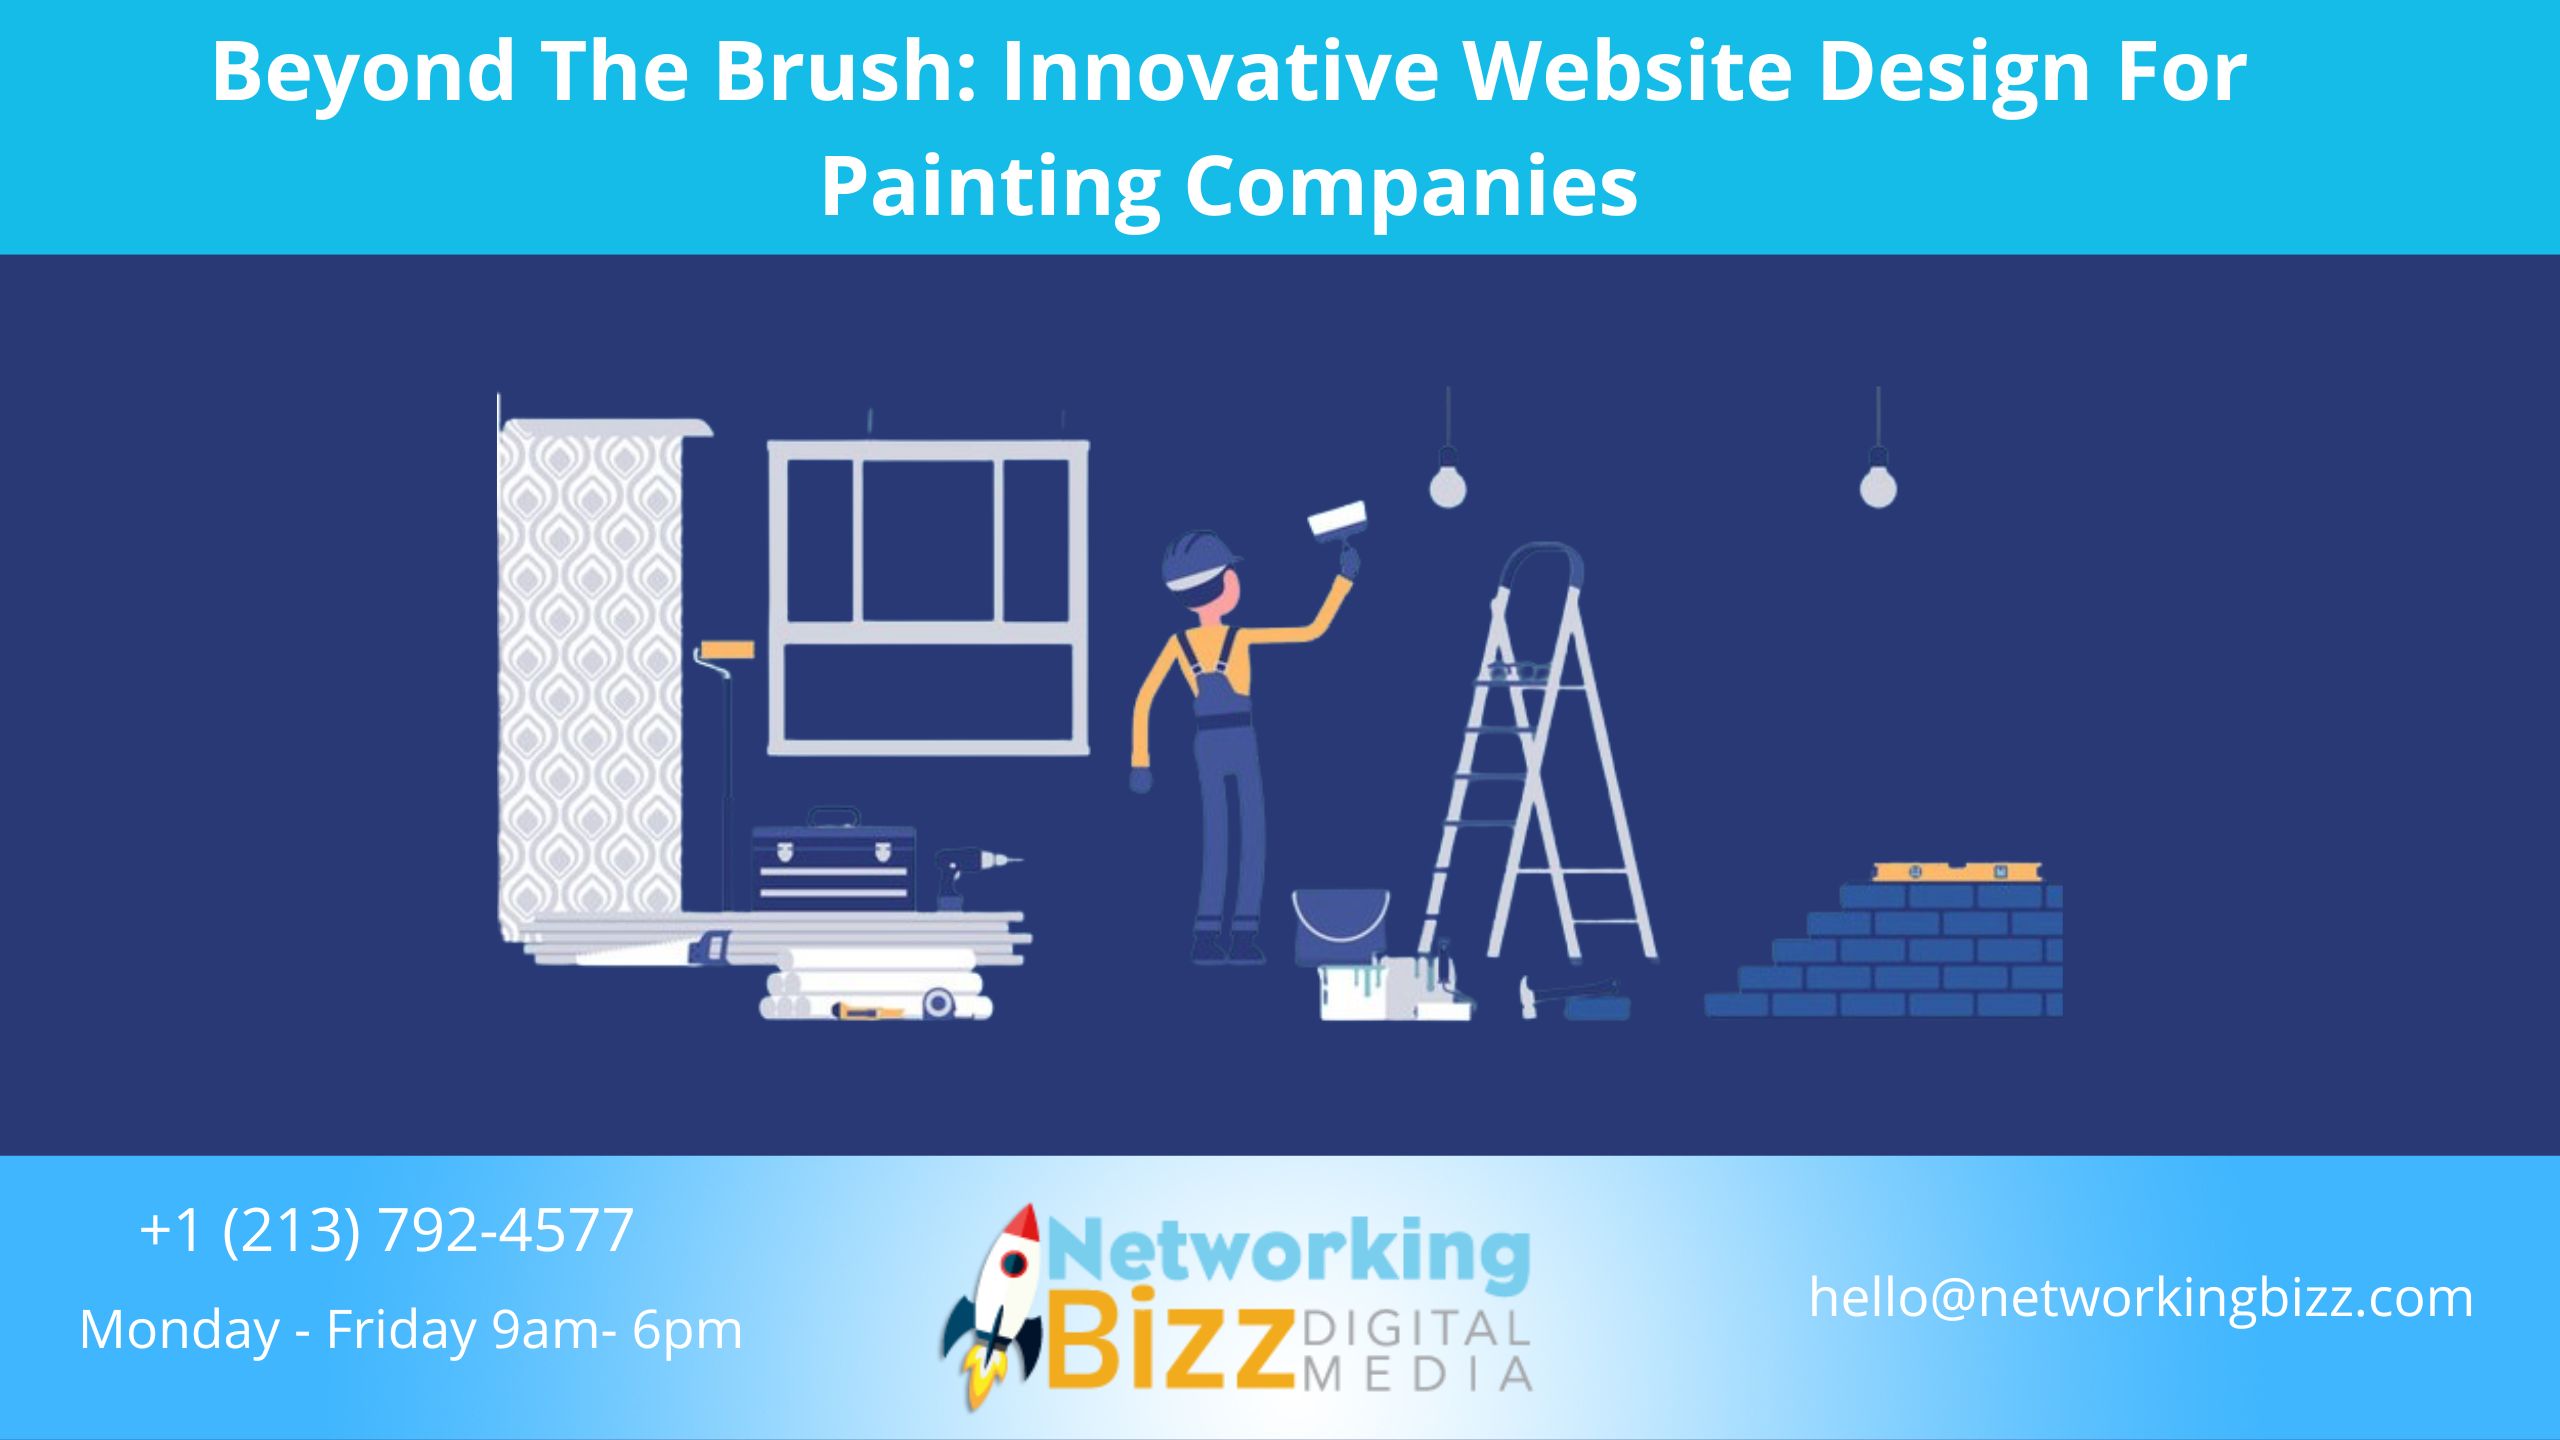 Beyond The Brush: Innovative Website Design For Painting Companies